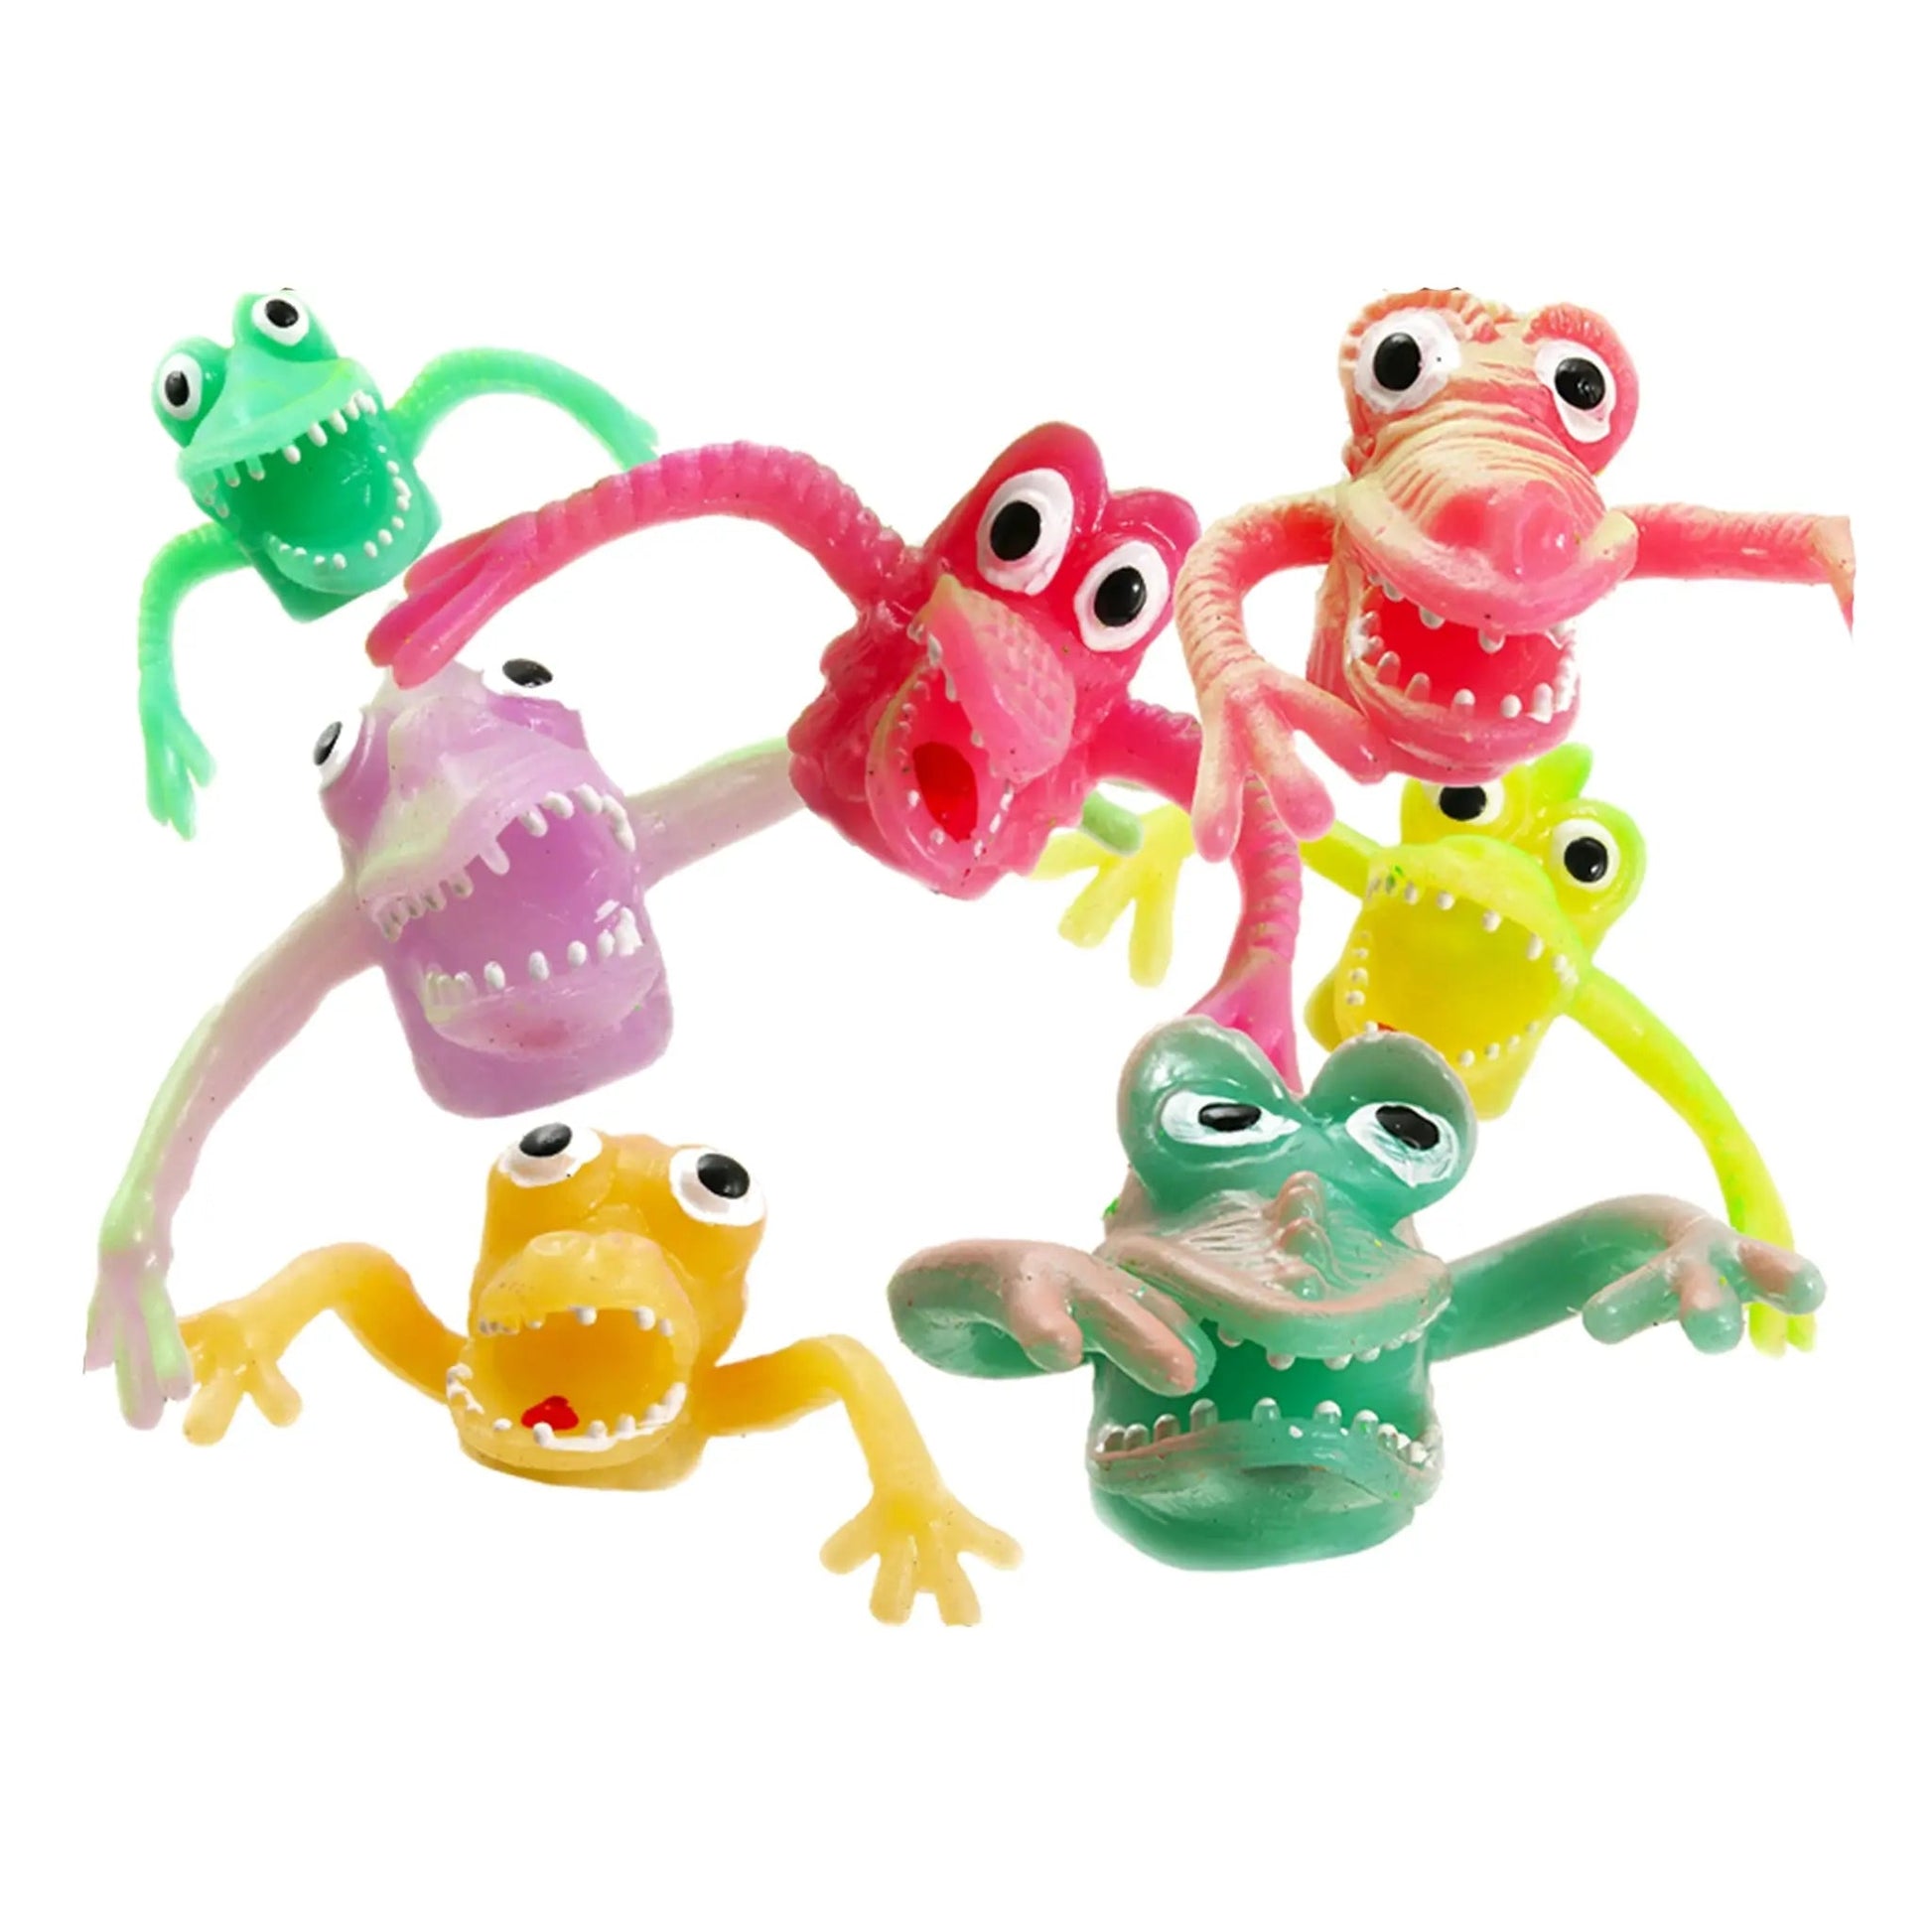 Finger Monsters - House of Marbles - The Forgotten Toy Shop